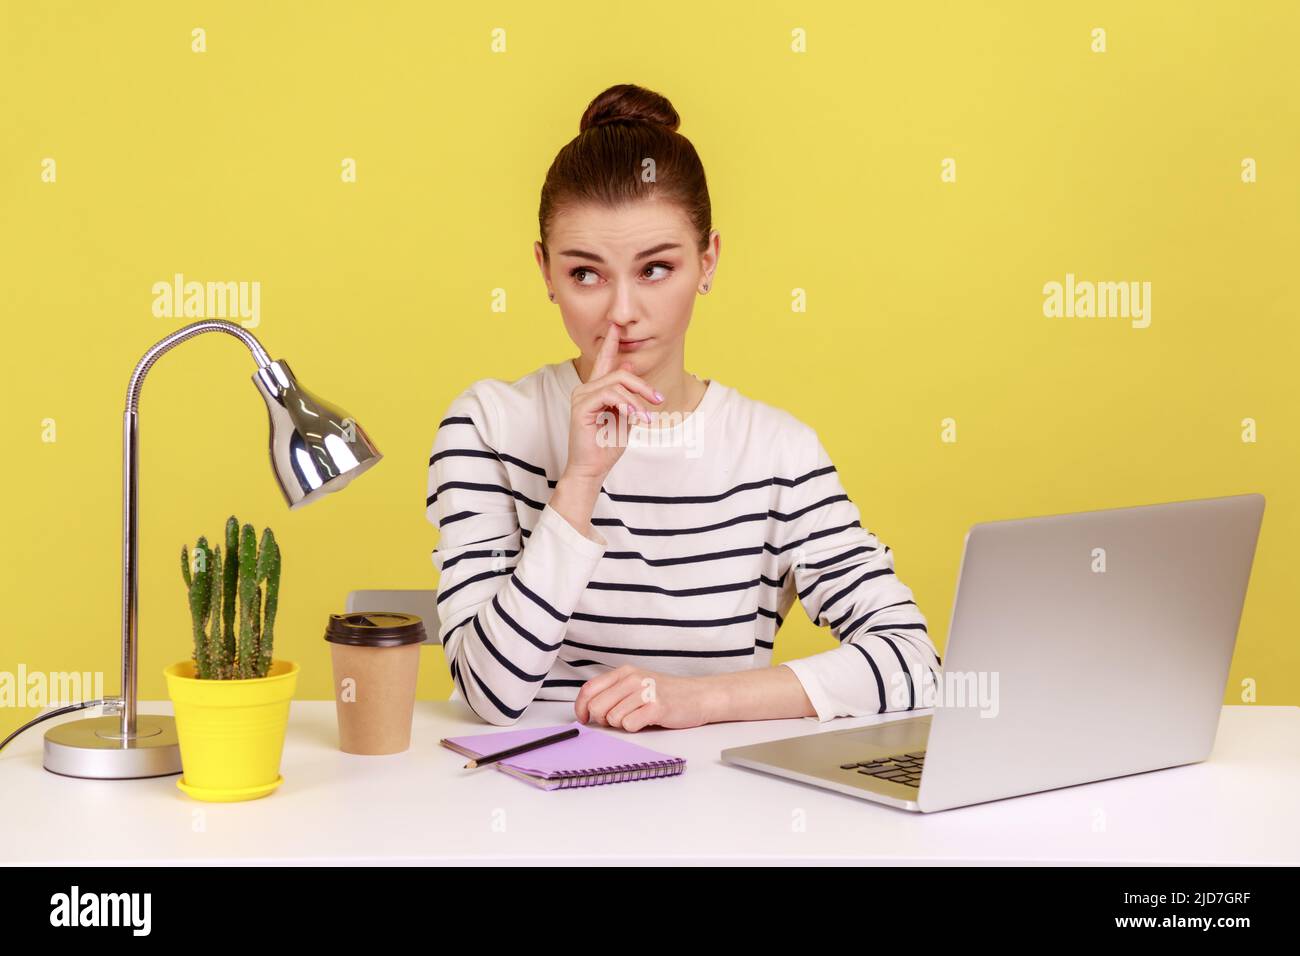 Lazy woman employee wearing striped shirt picking nose and looking away with comical expression, having break at workplace. Indoor studio studio shot isolated on yellow background. Stock Photo